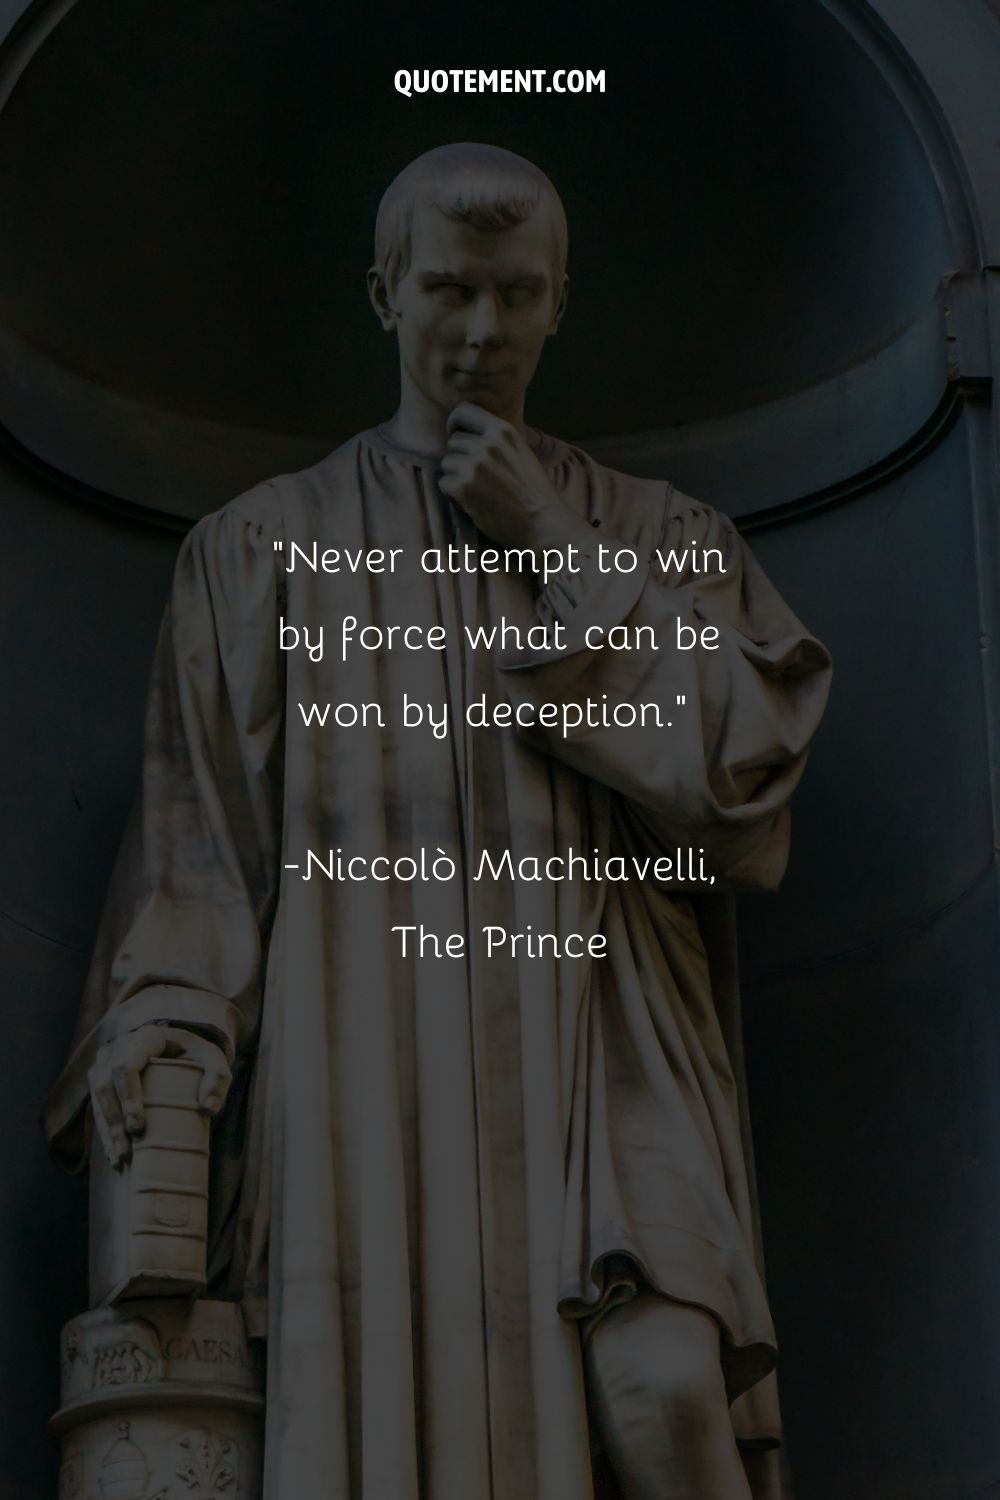 Never attempt to win by force what can be won by deception